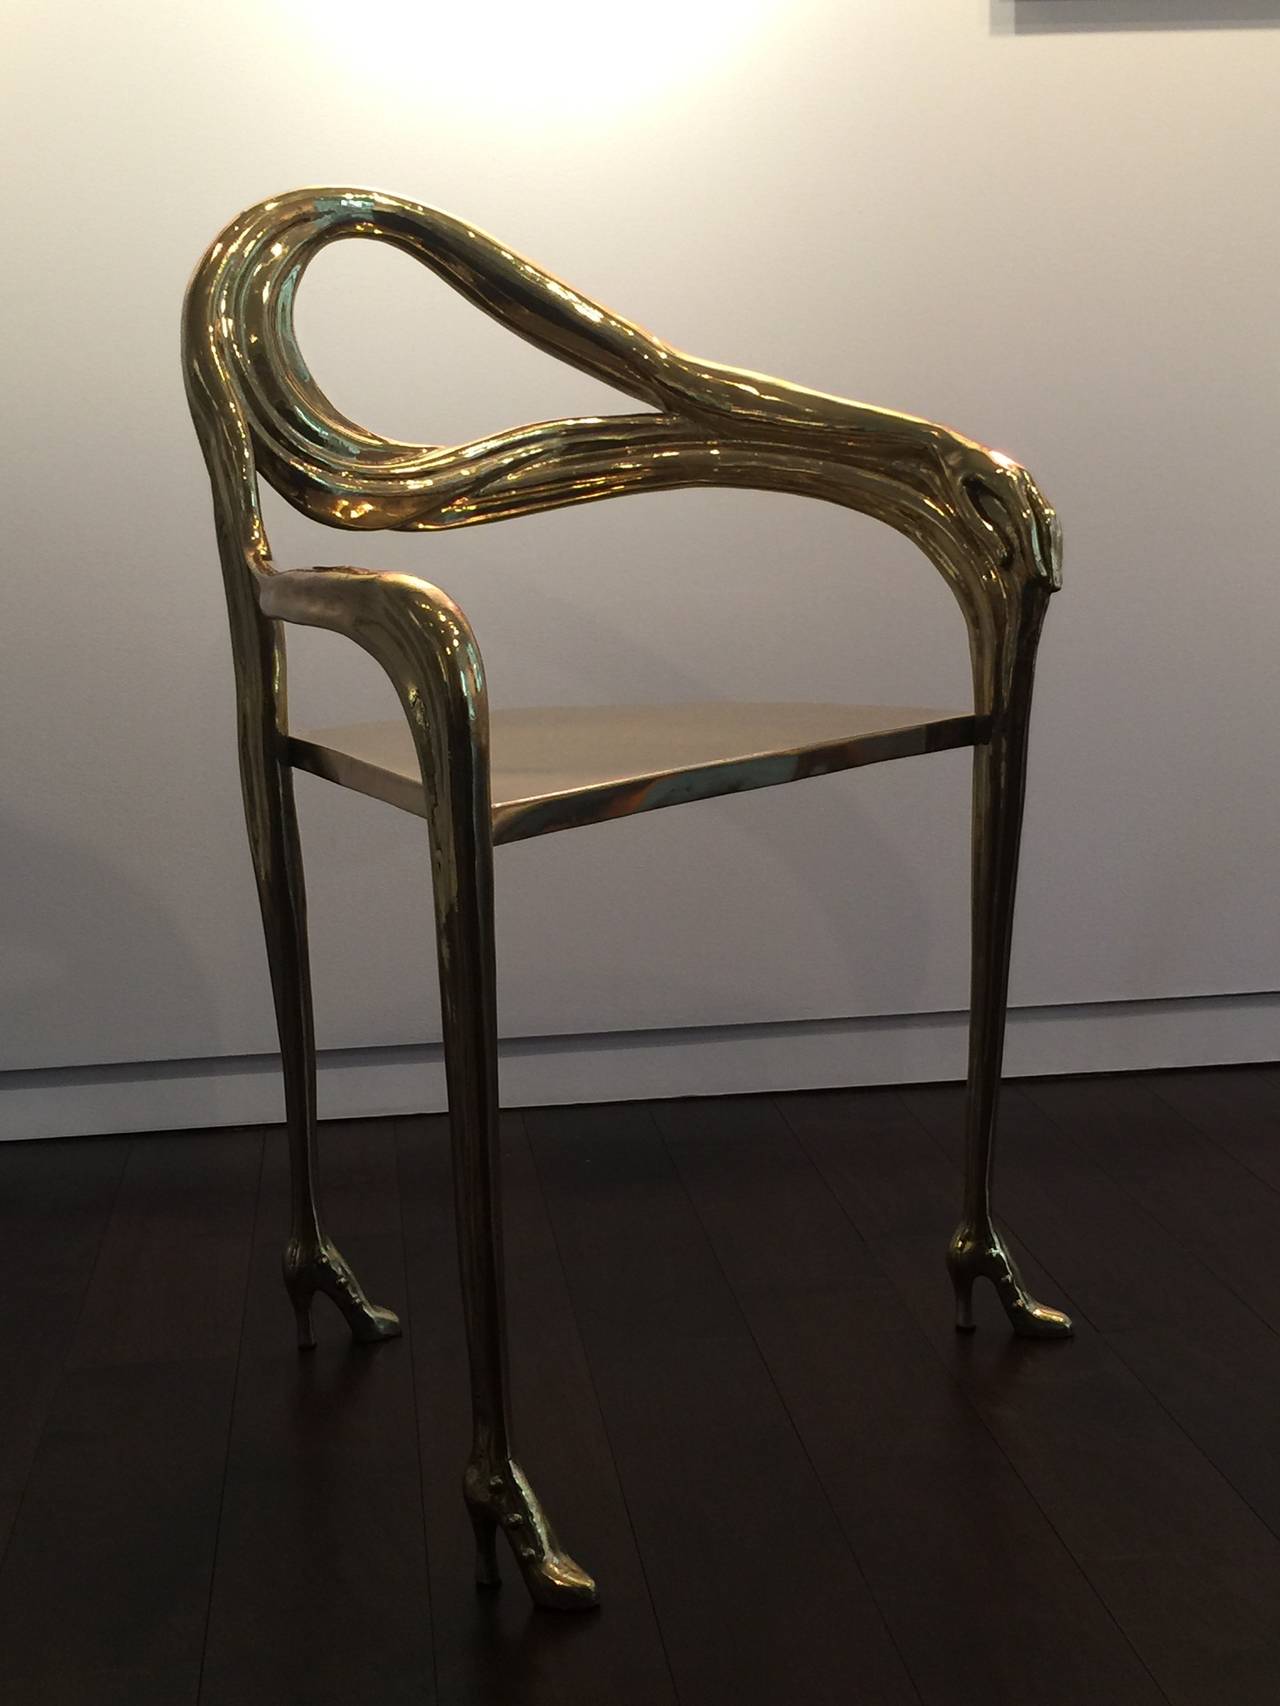 The Leda armchair was designed by Salvador Dali in the years 1935-1937 whilst he was working in collaboration with the French furniture designer Jean Michel Frank. The chair itself is made from brass castings, subsequently welded together. The